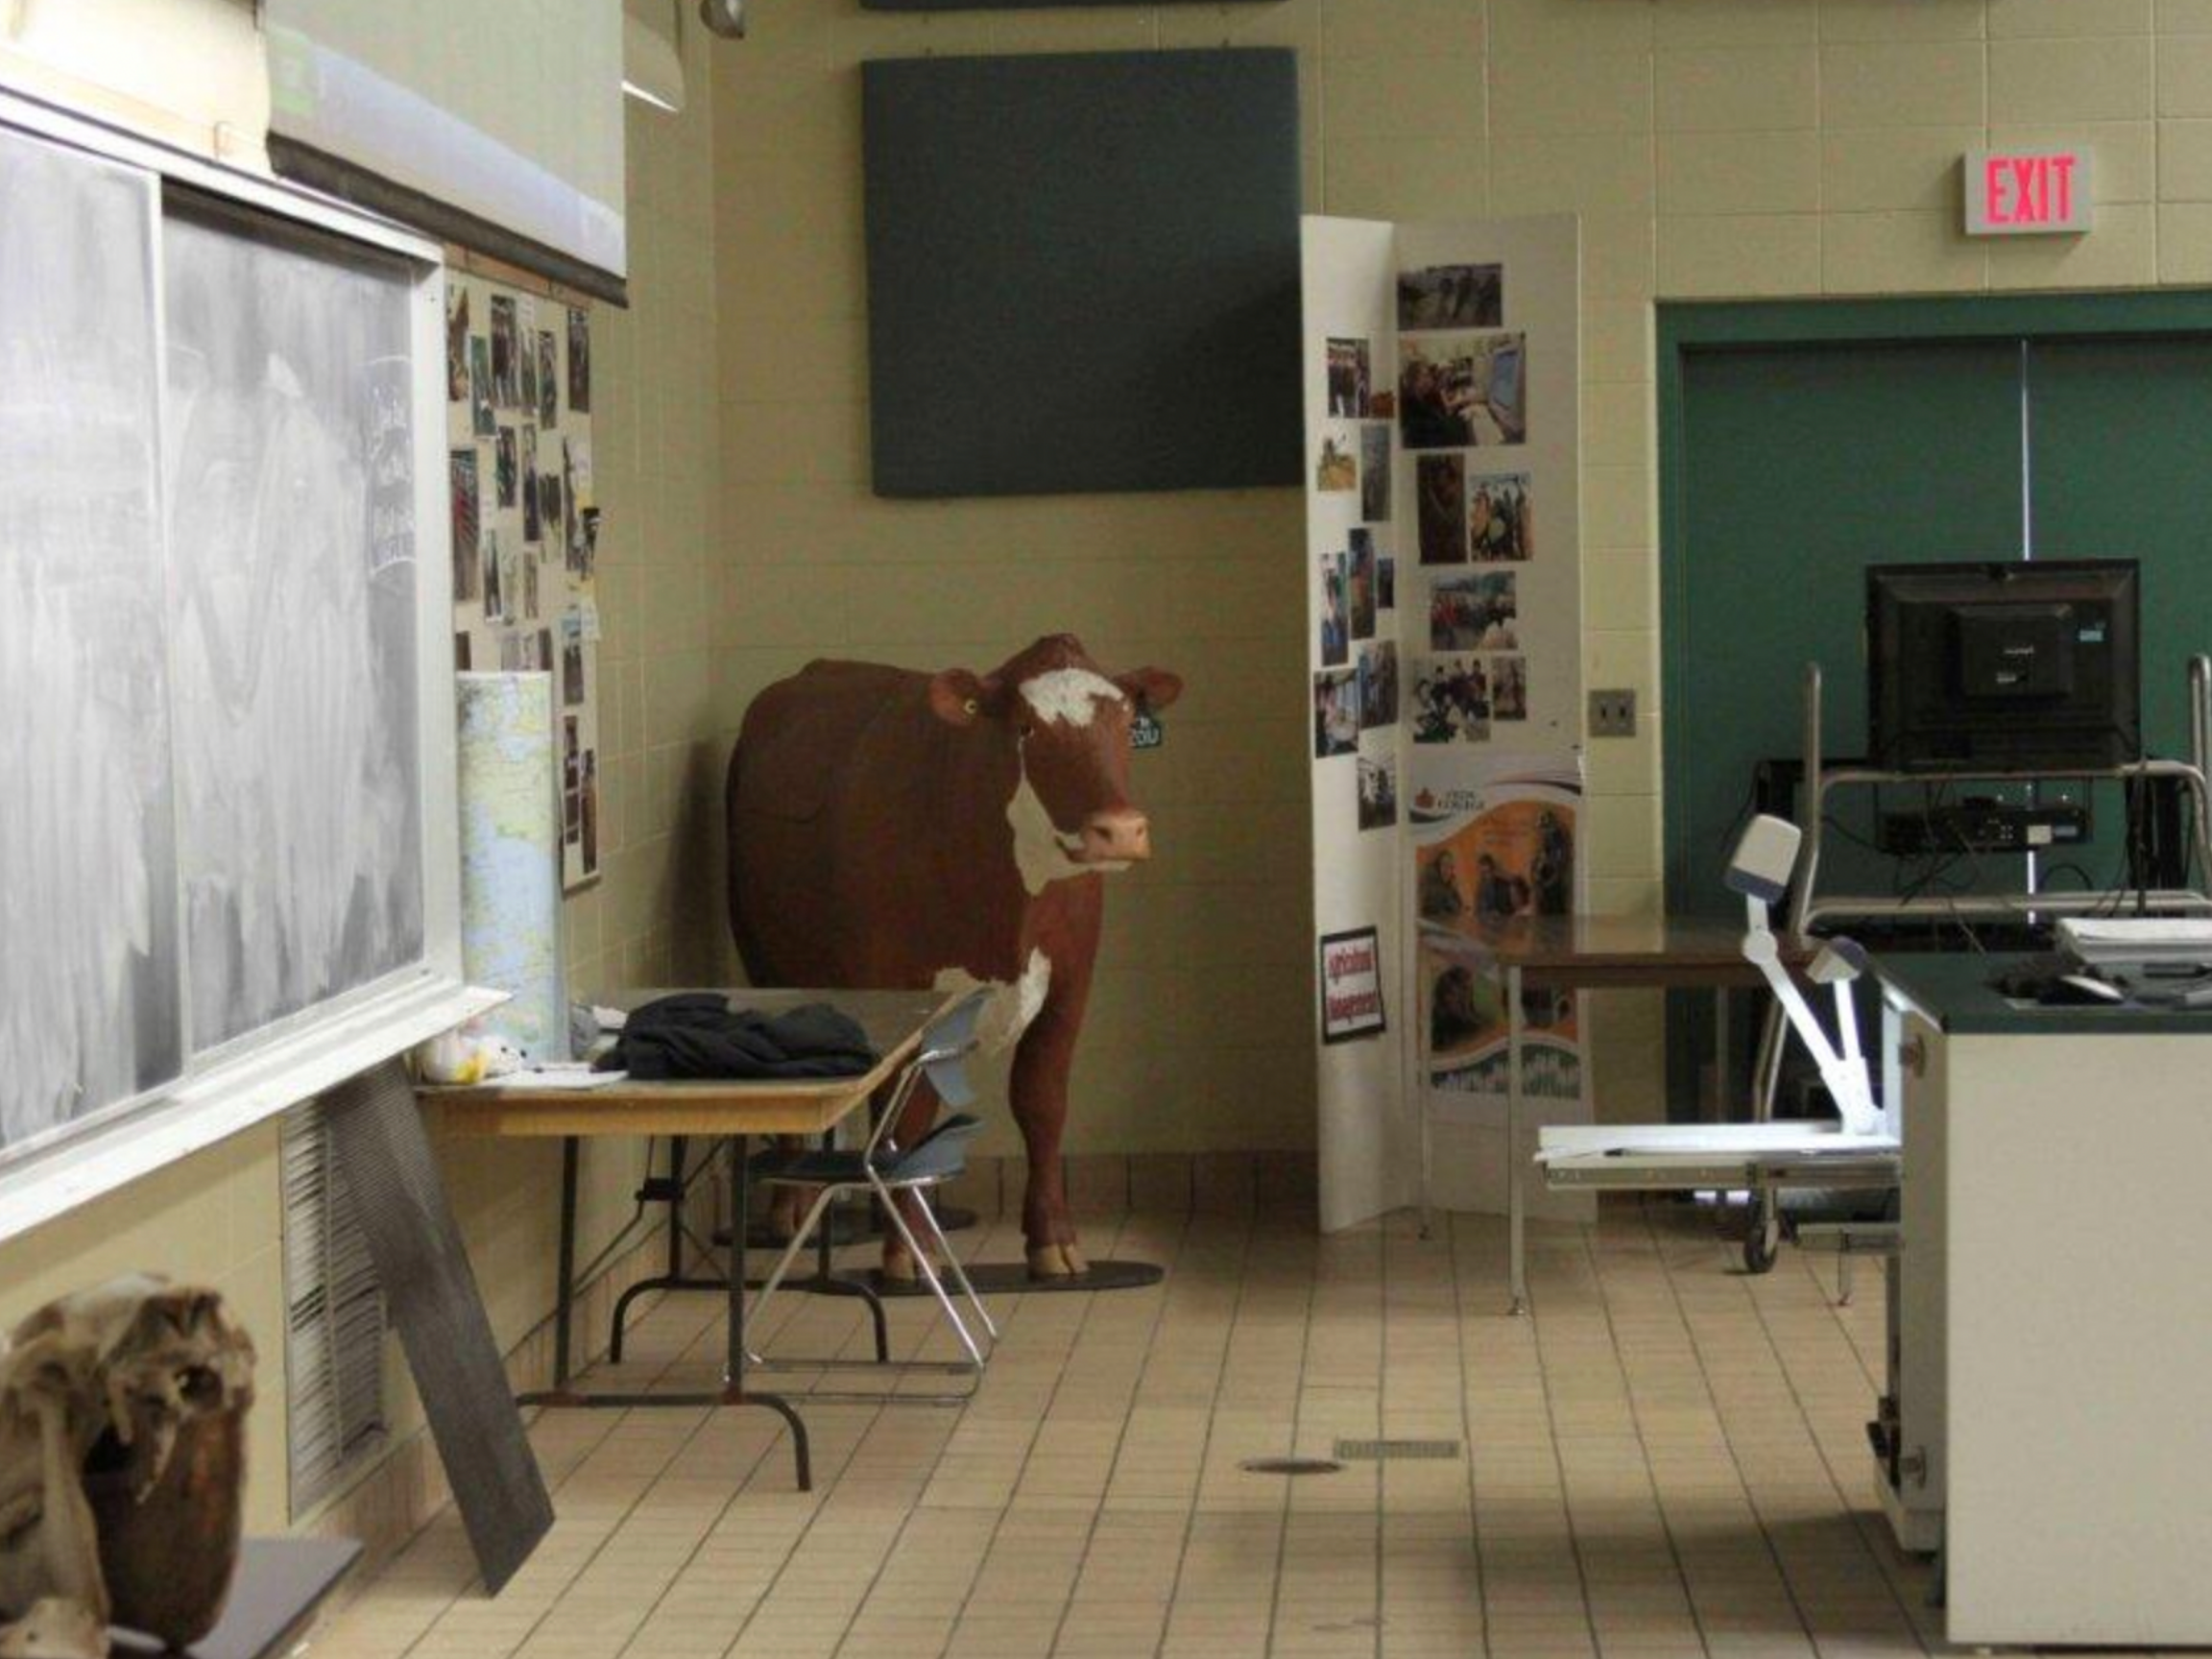  “Lucy” in the classroom. Students can now learn various dystocia issues and procedures in the classroom and practice those solutions without causing discomfort or endangering a live animal or themselves. This allows them to build confidence before m